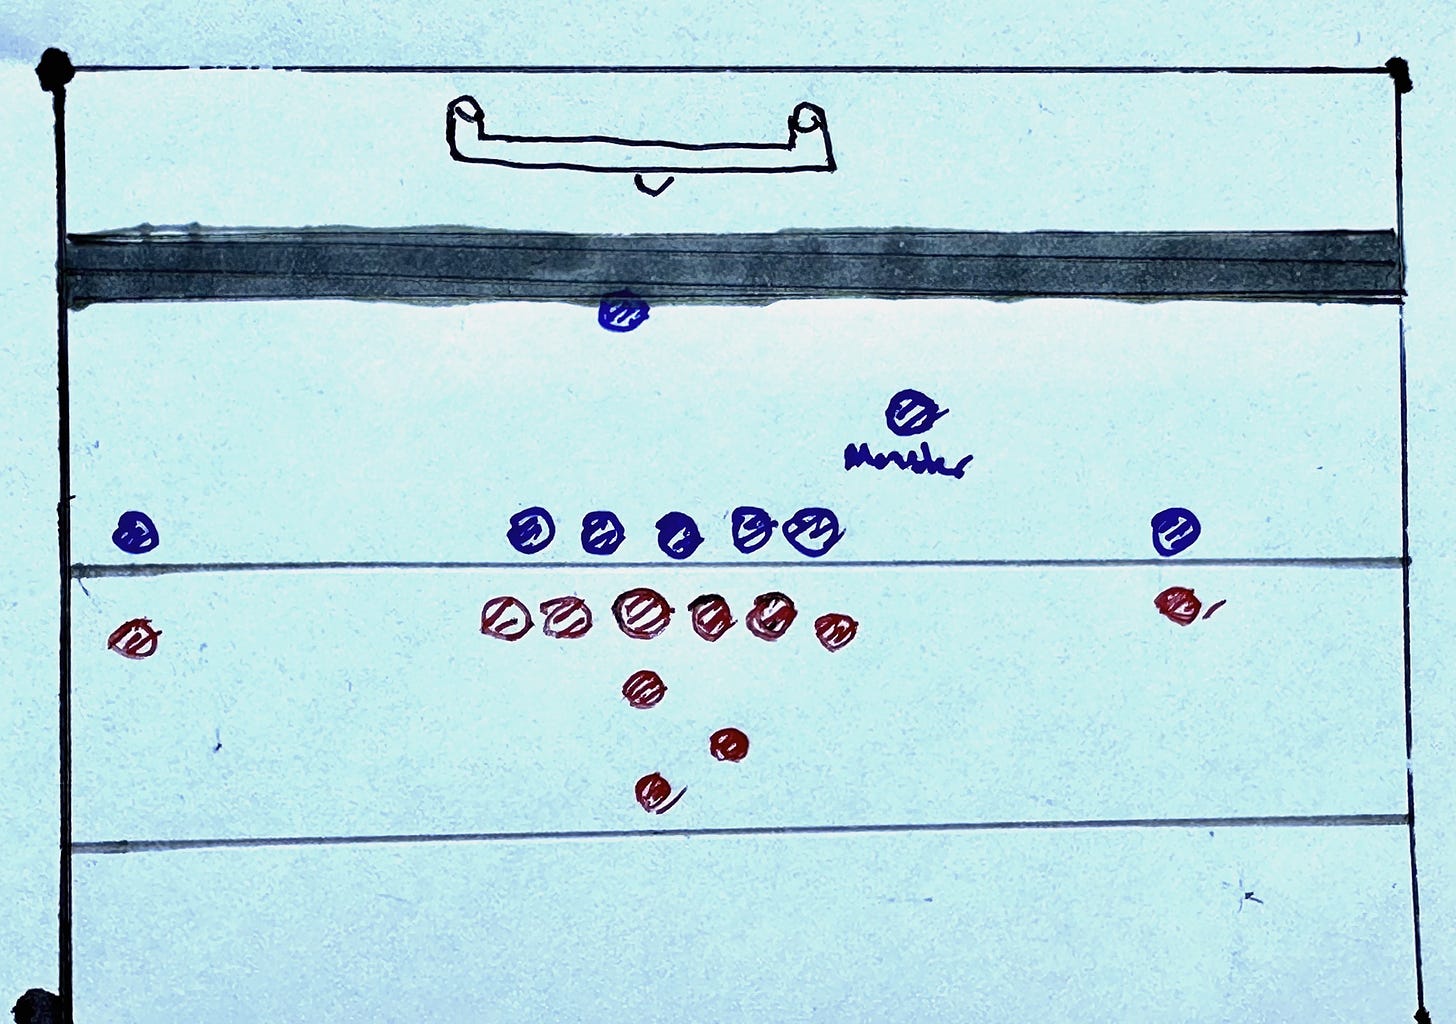 Drawing of football field with offense and defense